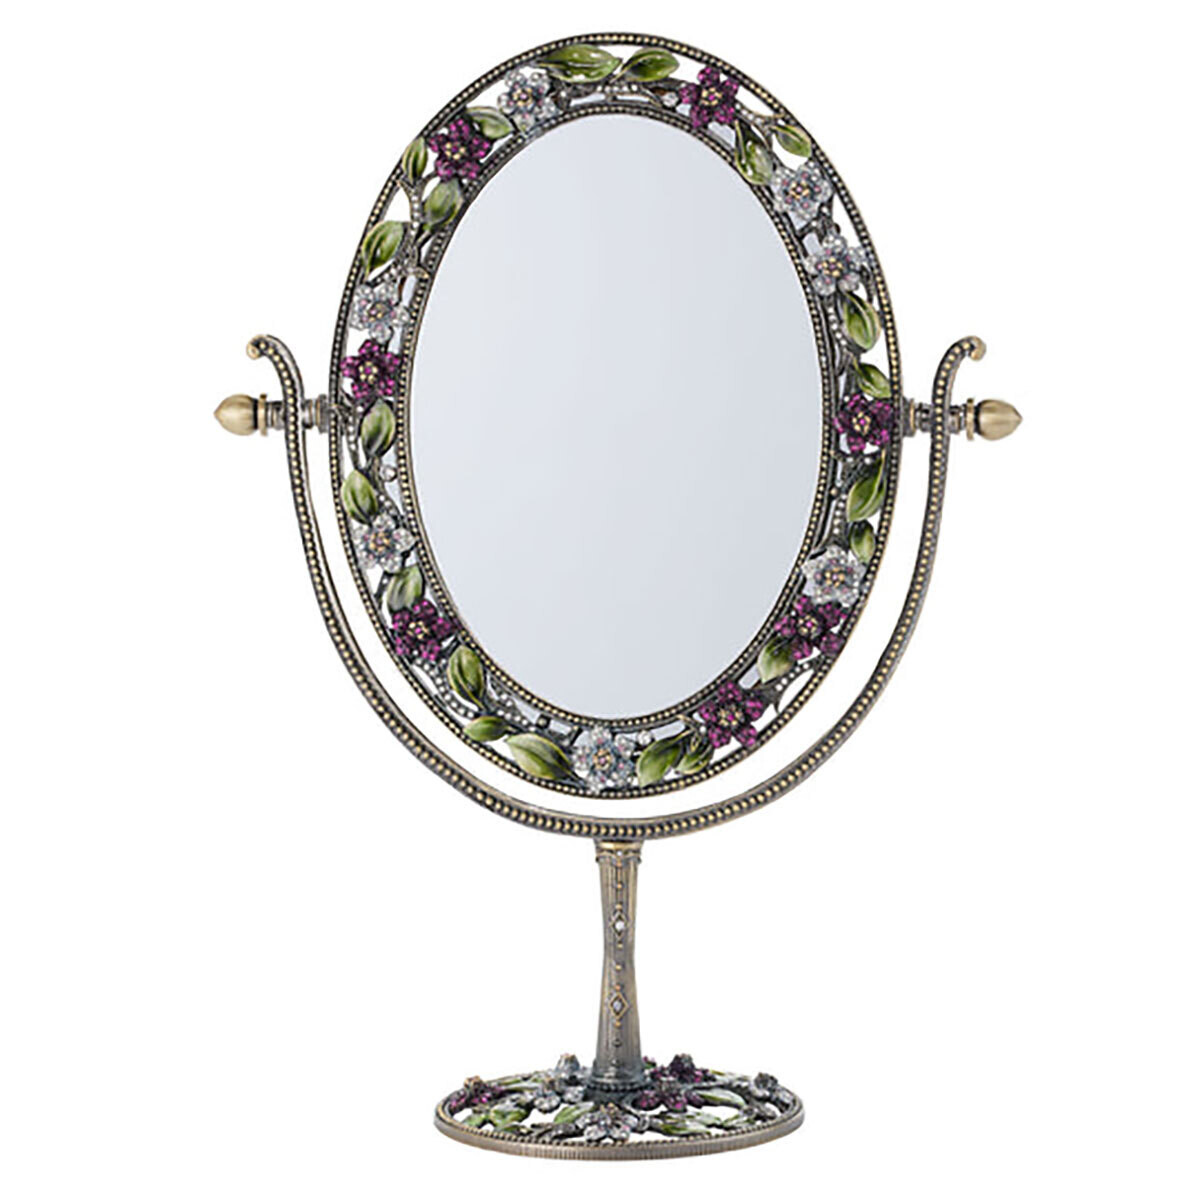 Olivia Riegel Sophie Oval Magnified Standing Mirror MR2300